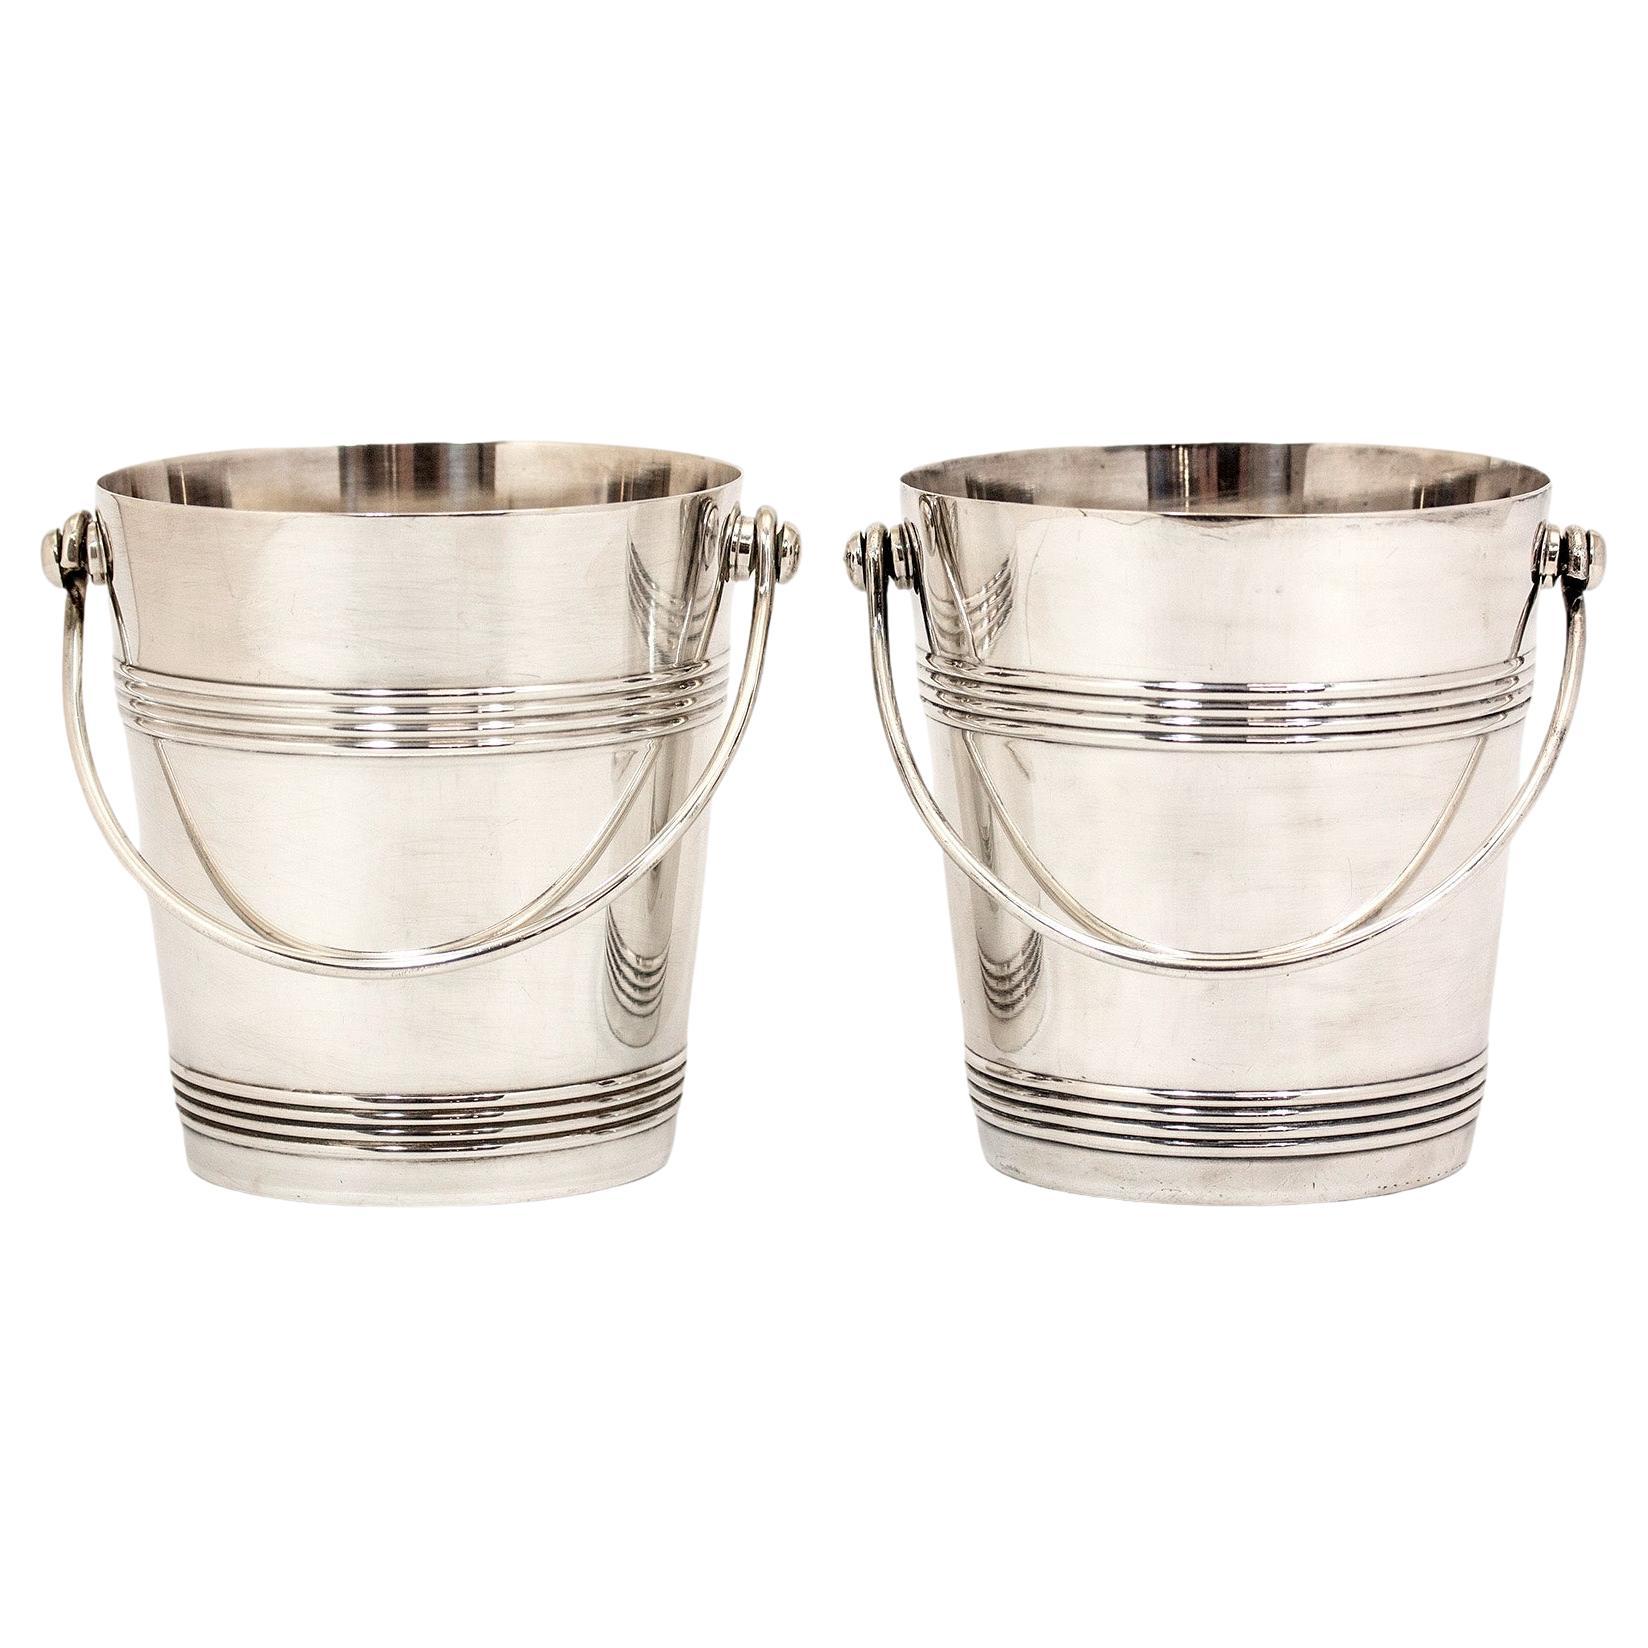 Christofle Pair of Silver Plated Ice Buckets